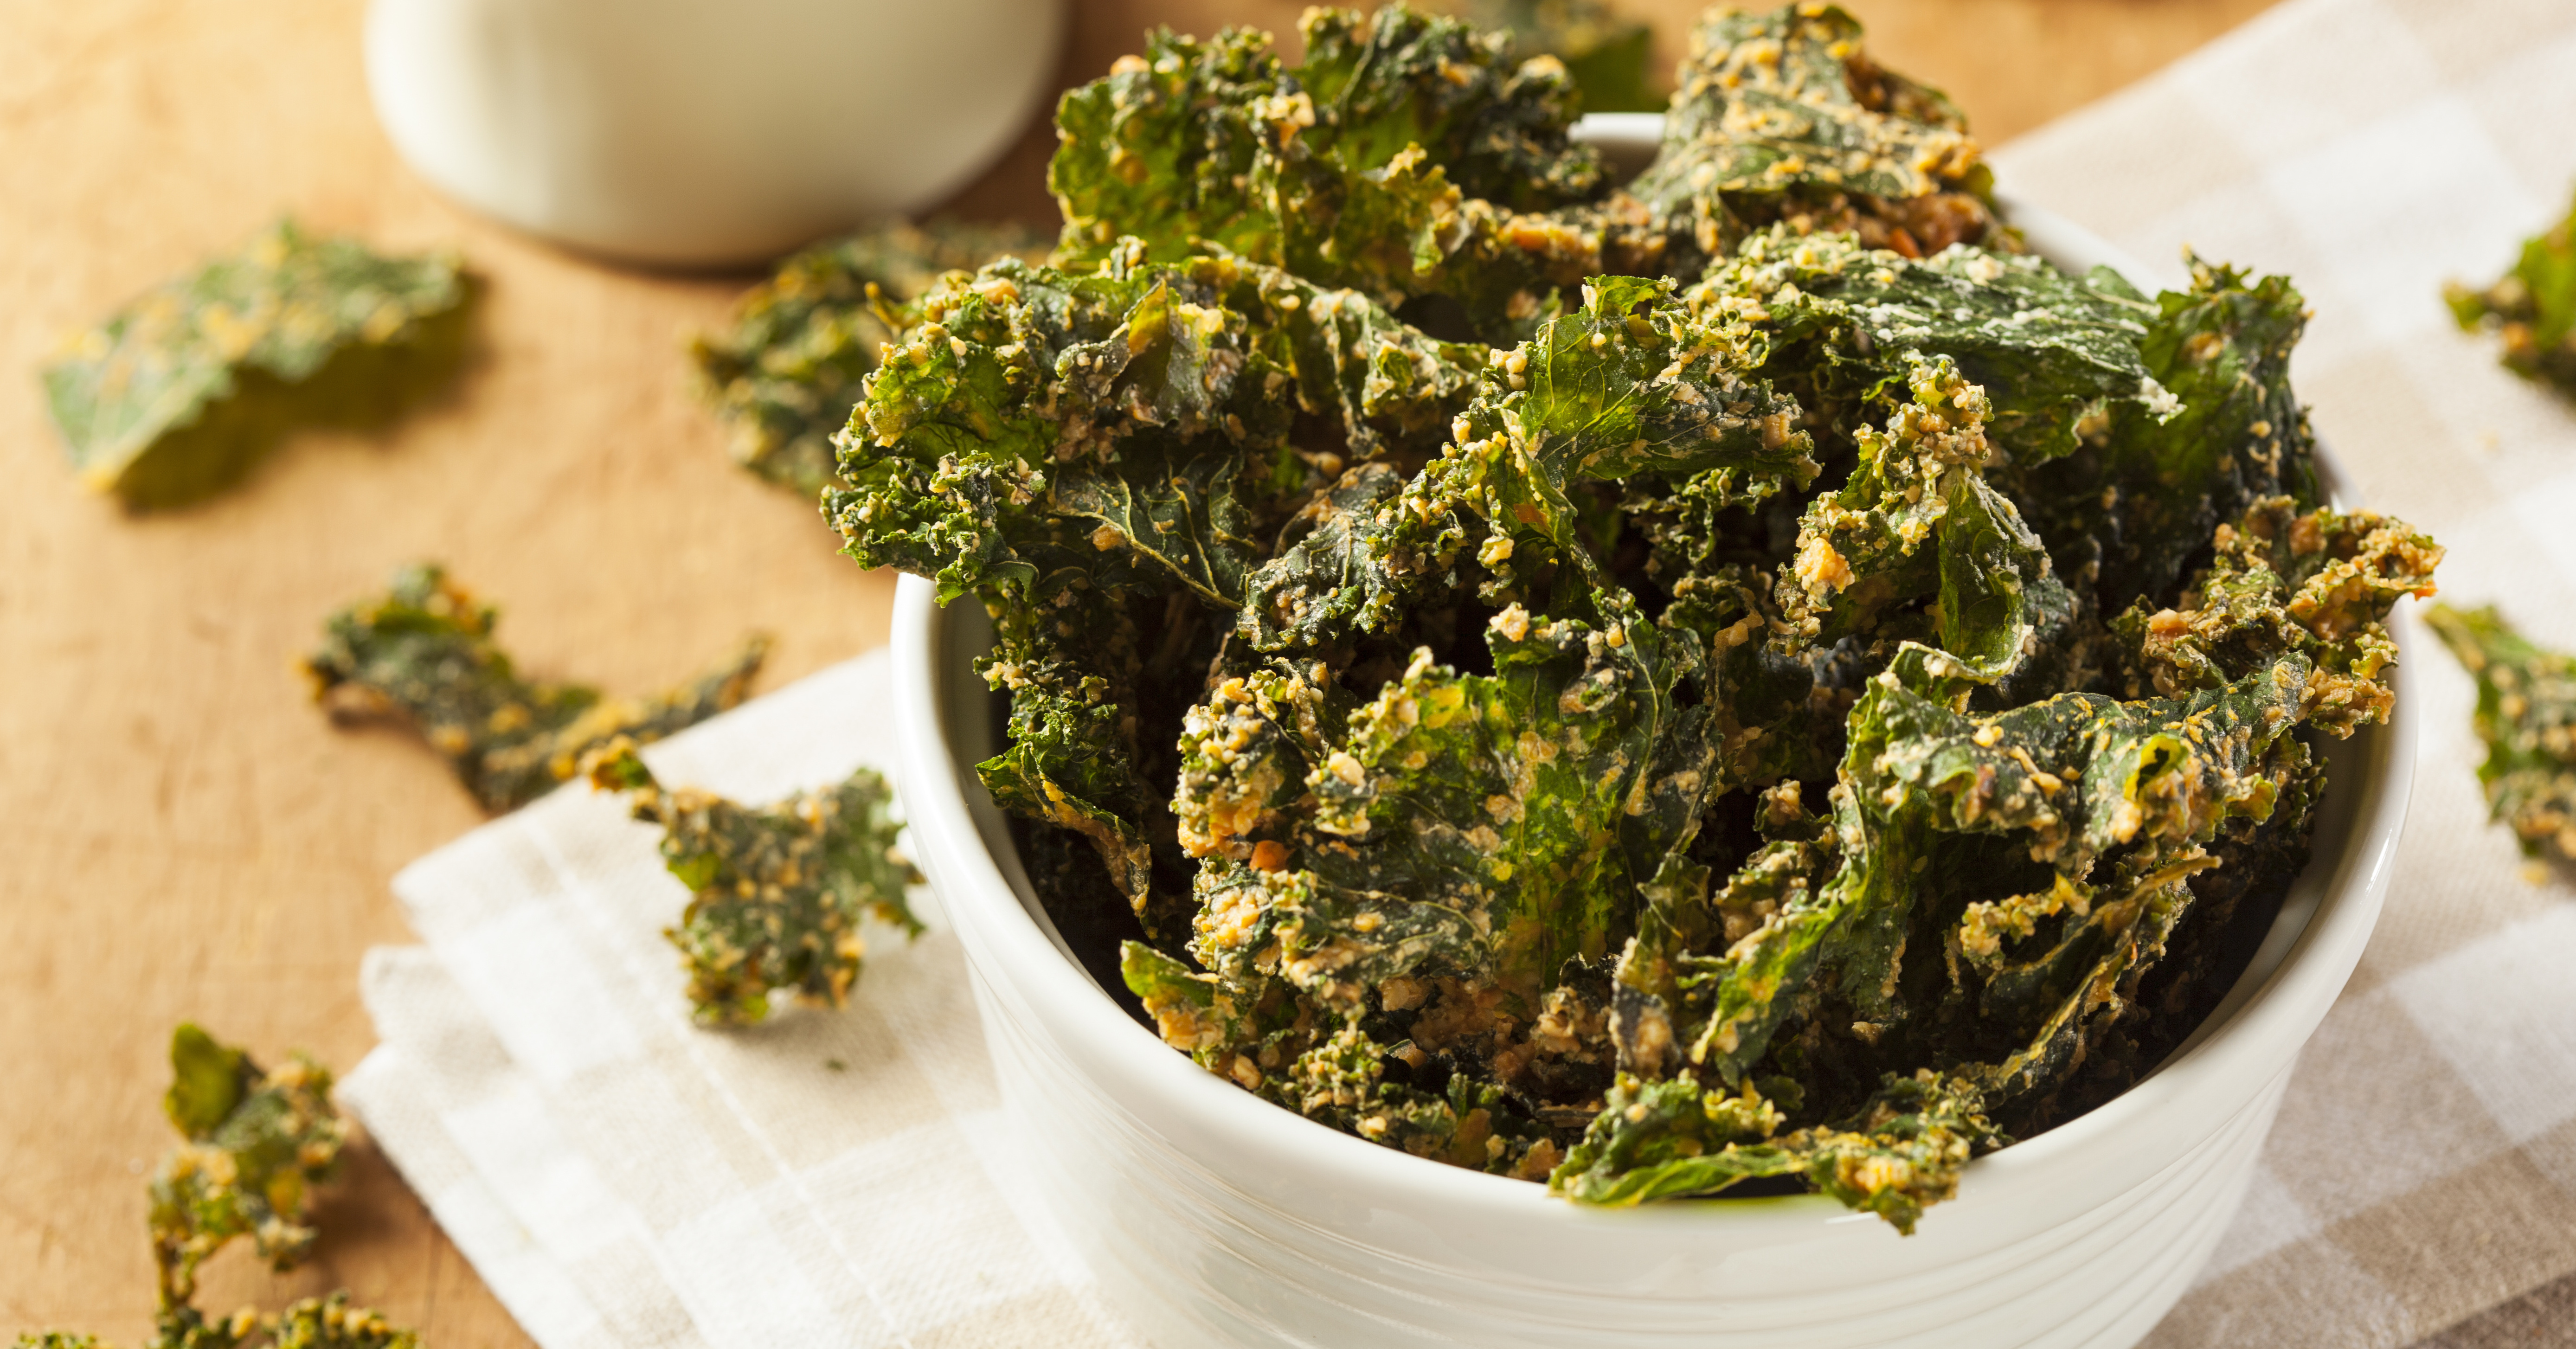 Spicy-Sweet Kale Chips